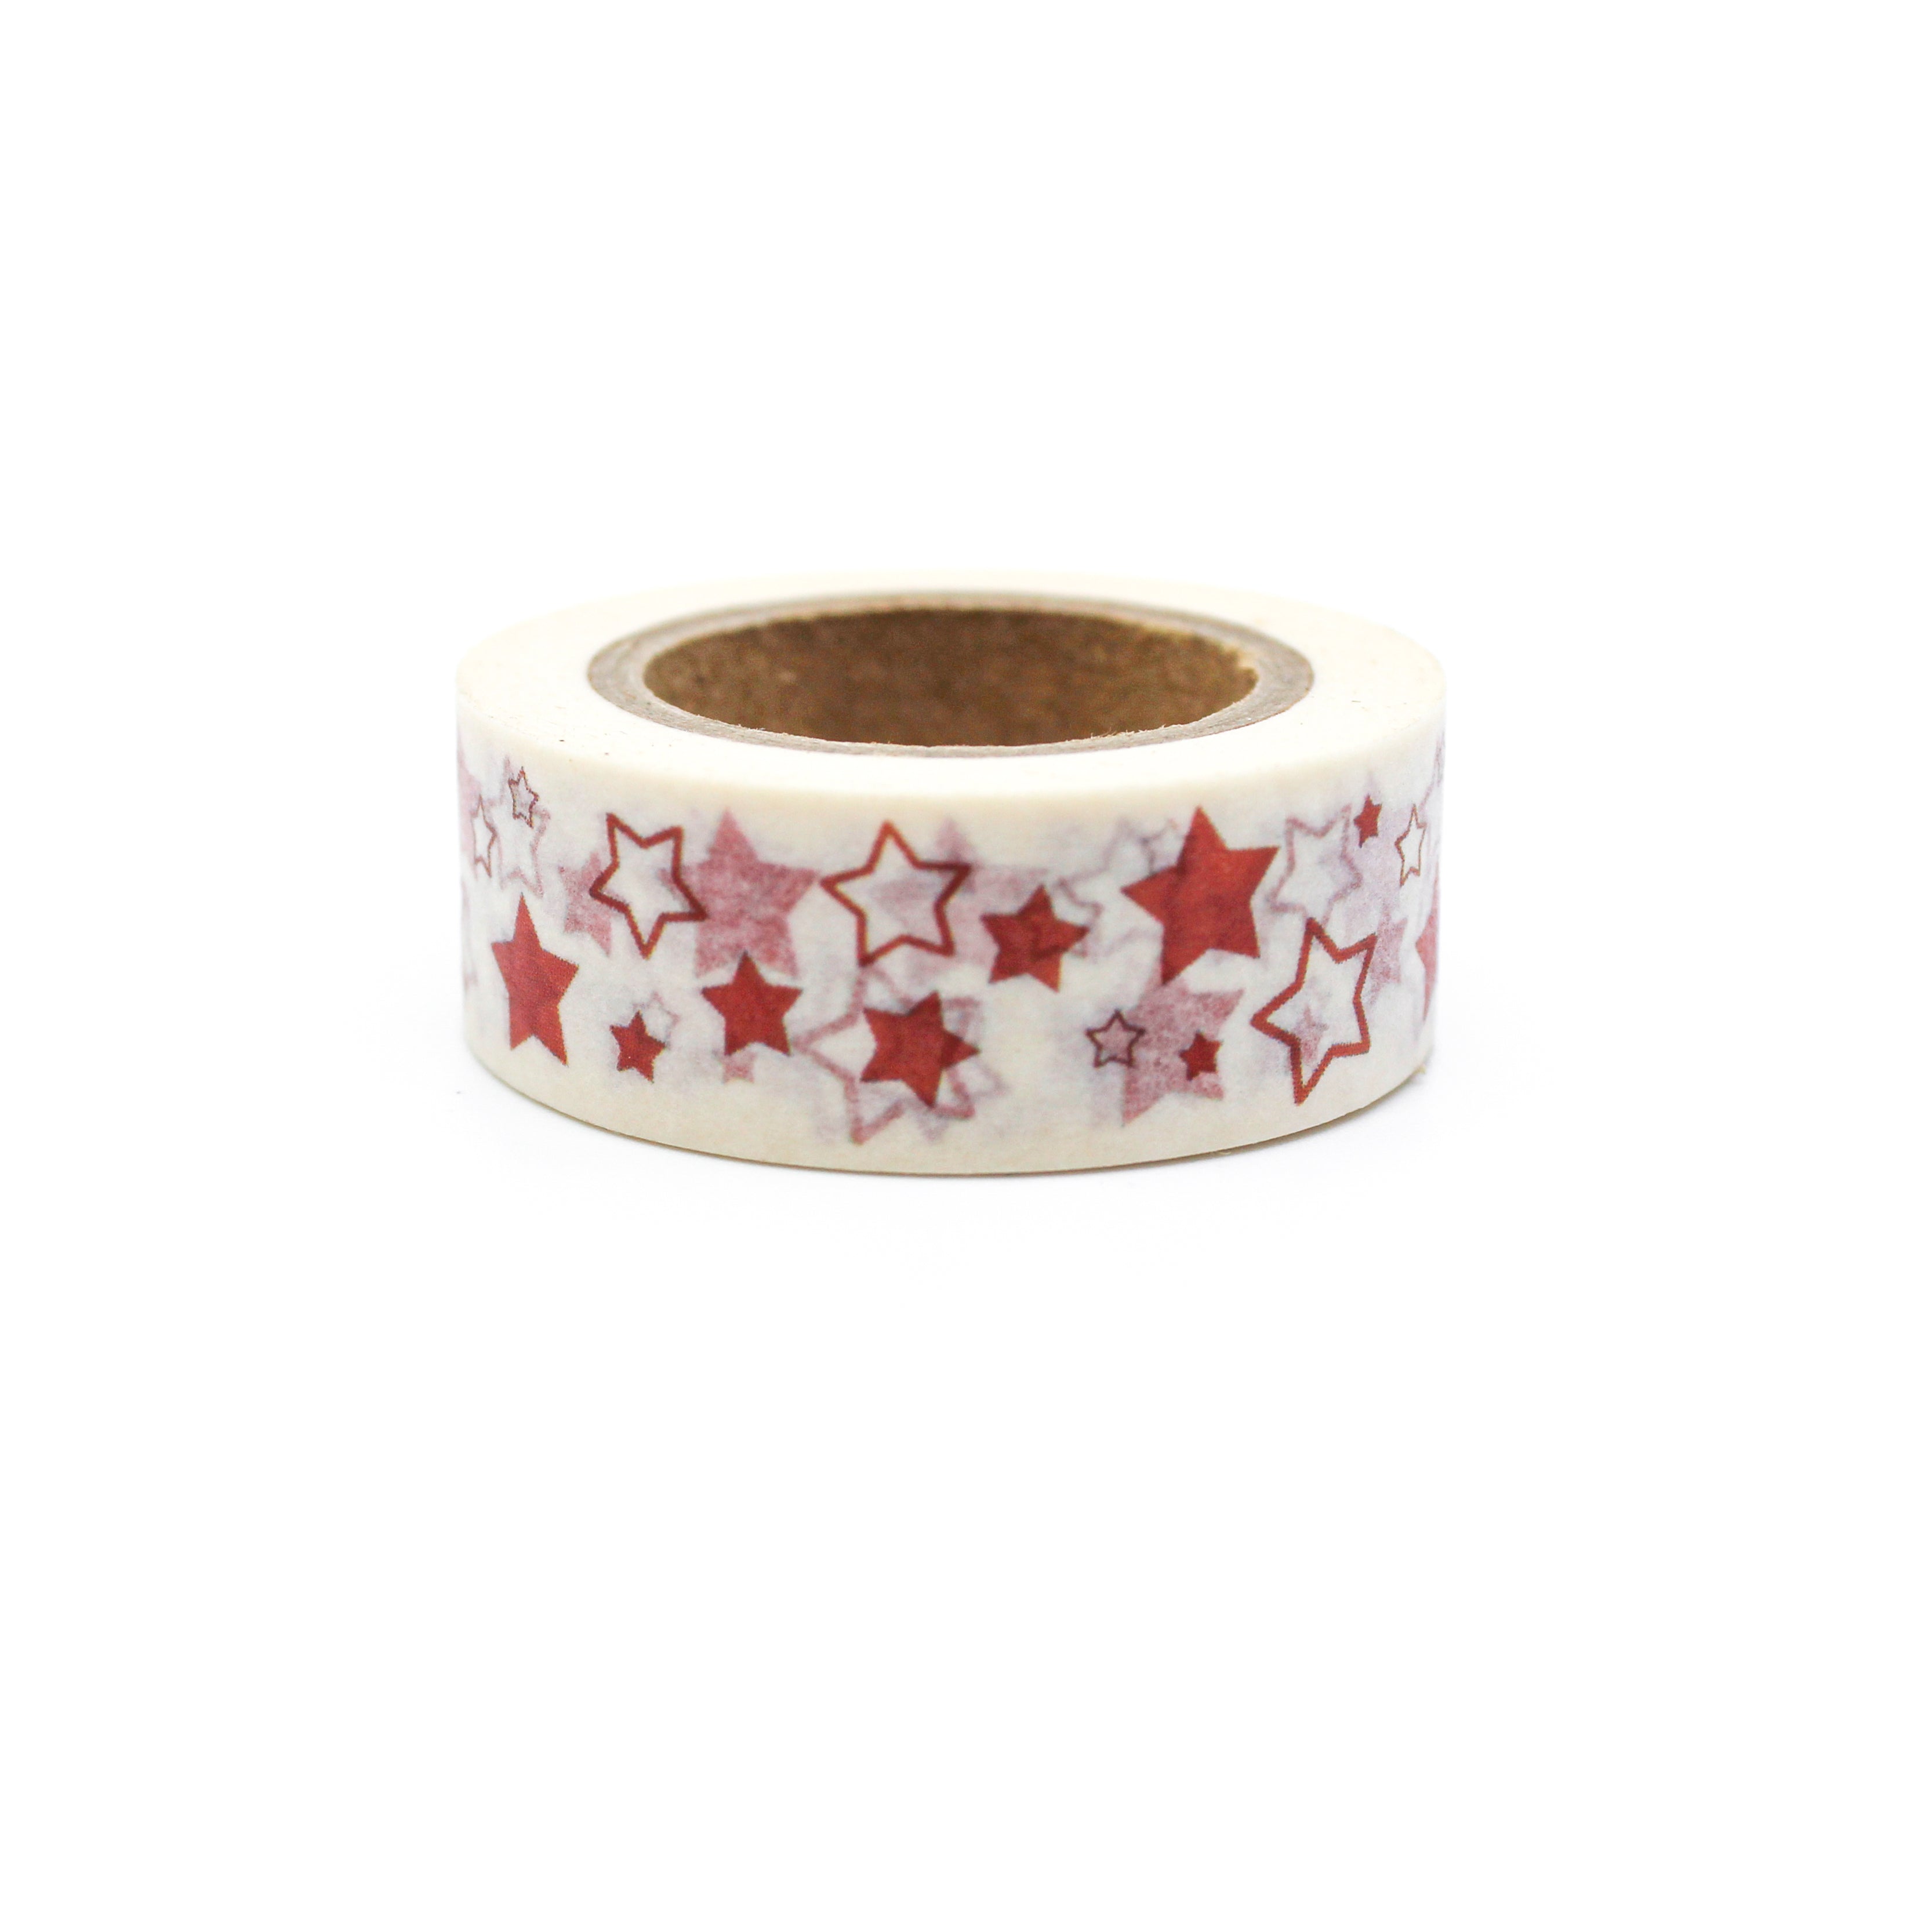 This is an interstellar red and white stars washi tape from BBB Supplies Craft Shop